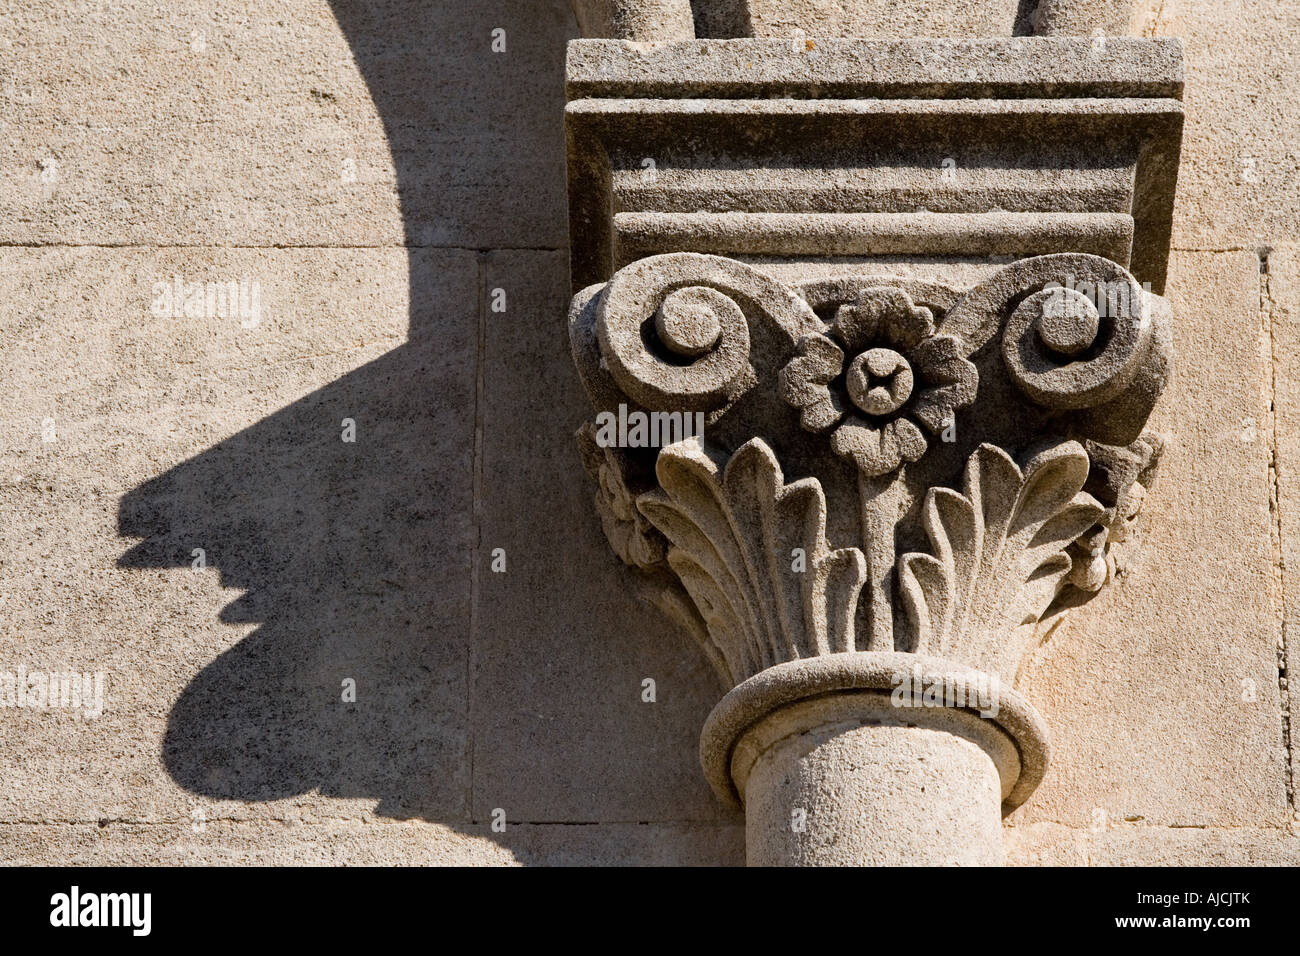 Architectural detail of a carved stone column Stock Photo